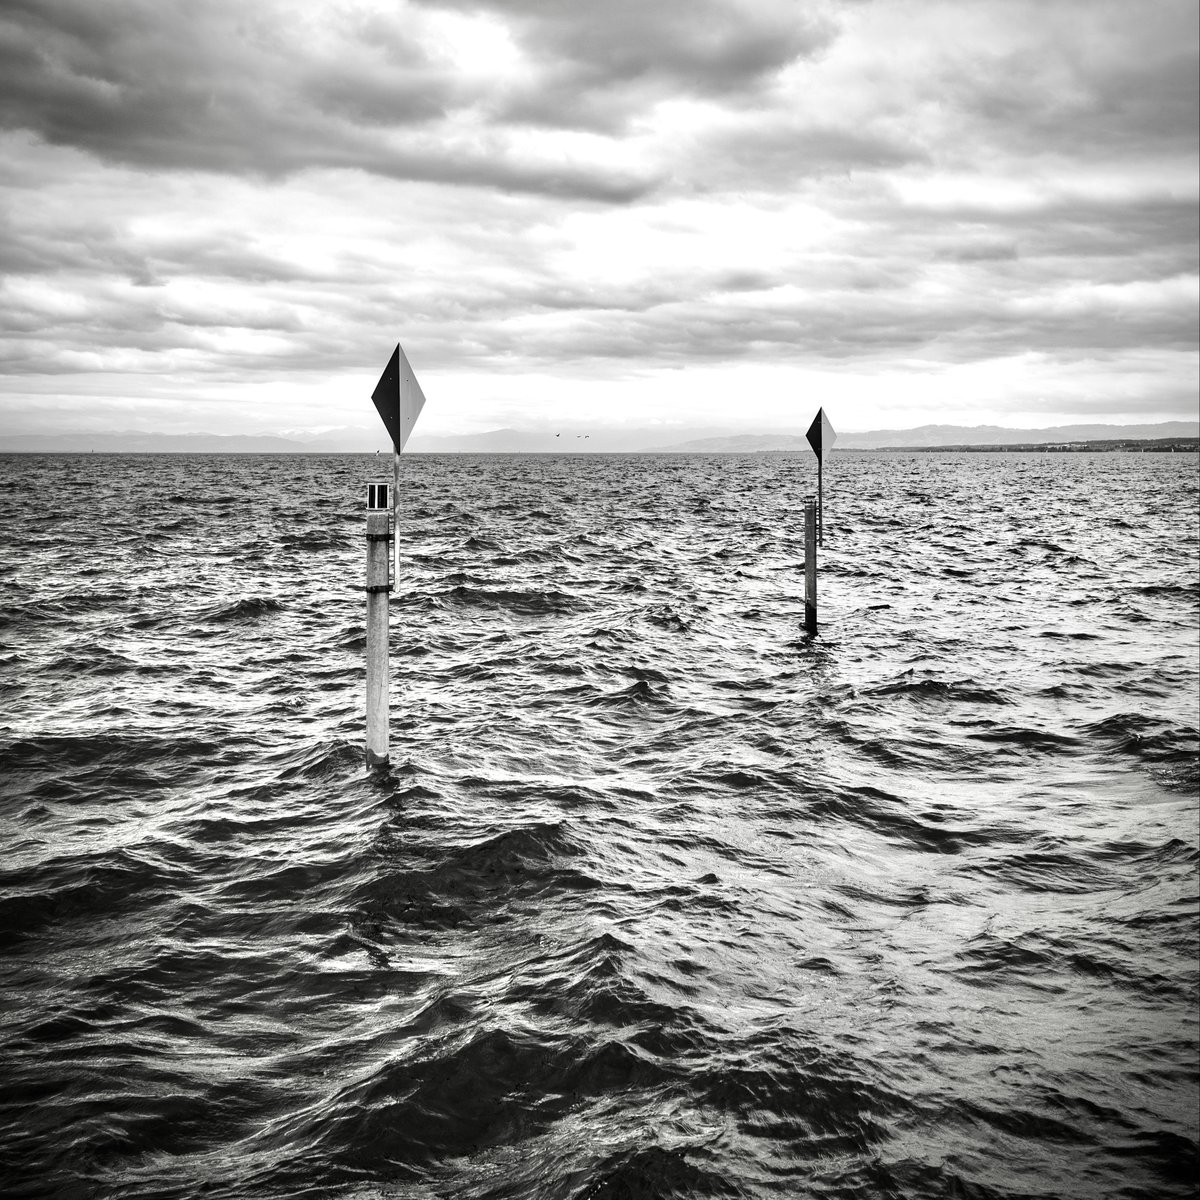 Out to Sea, Lake Constance

#blackandwhitephotography